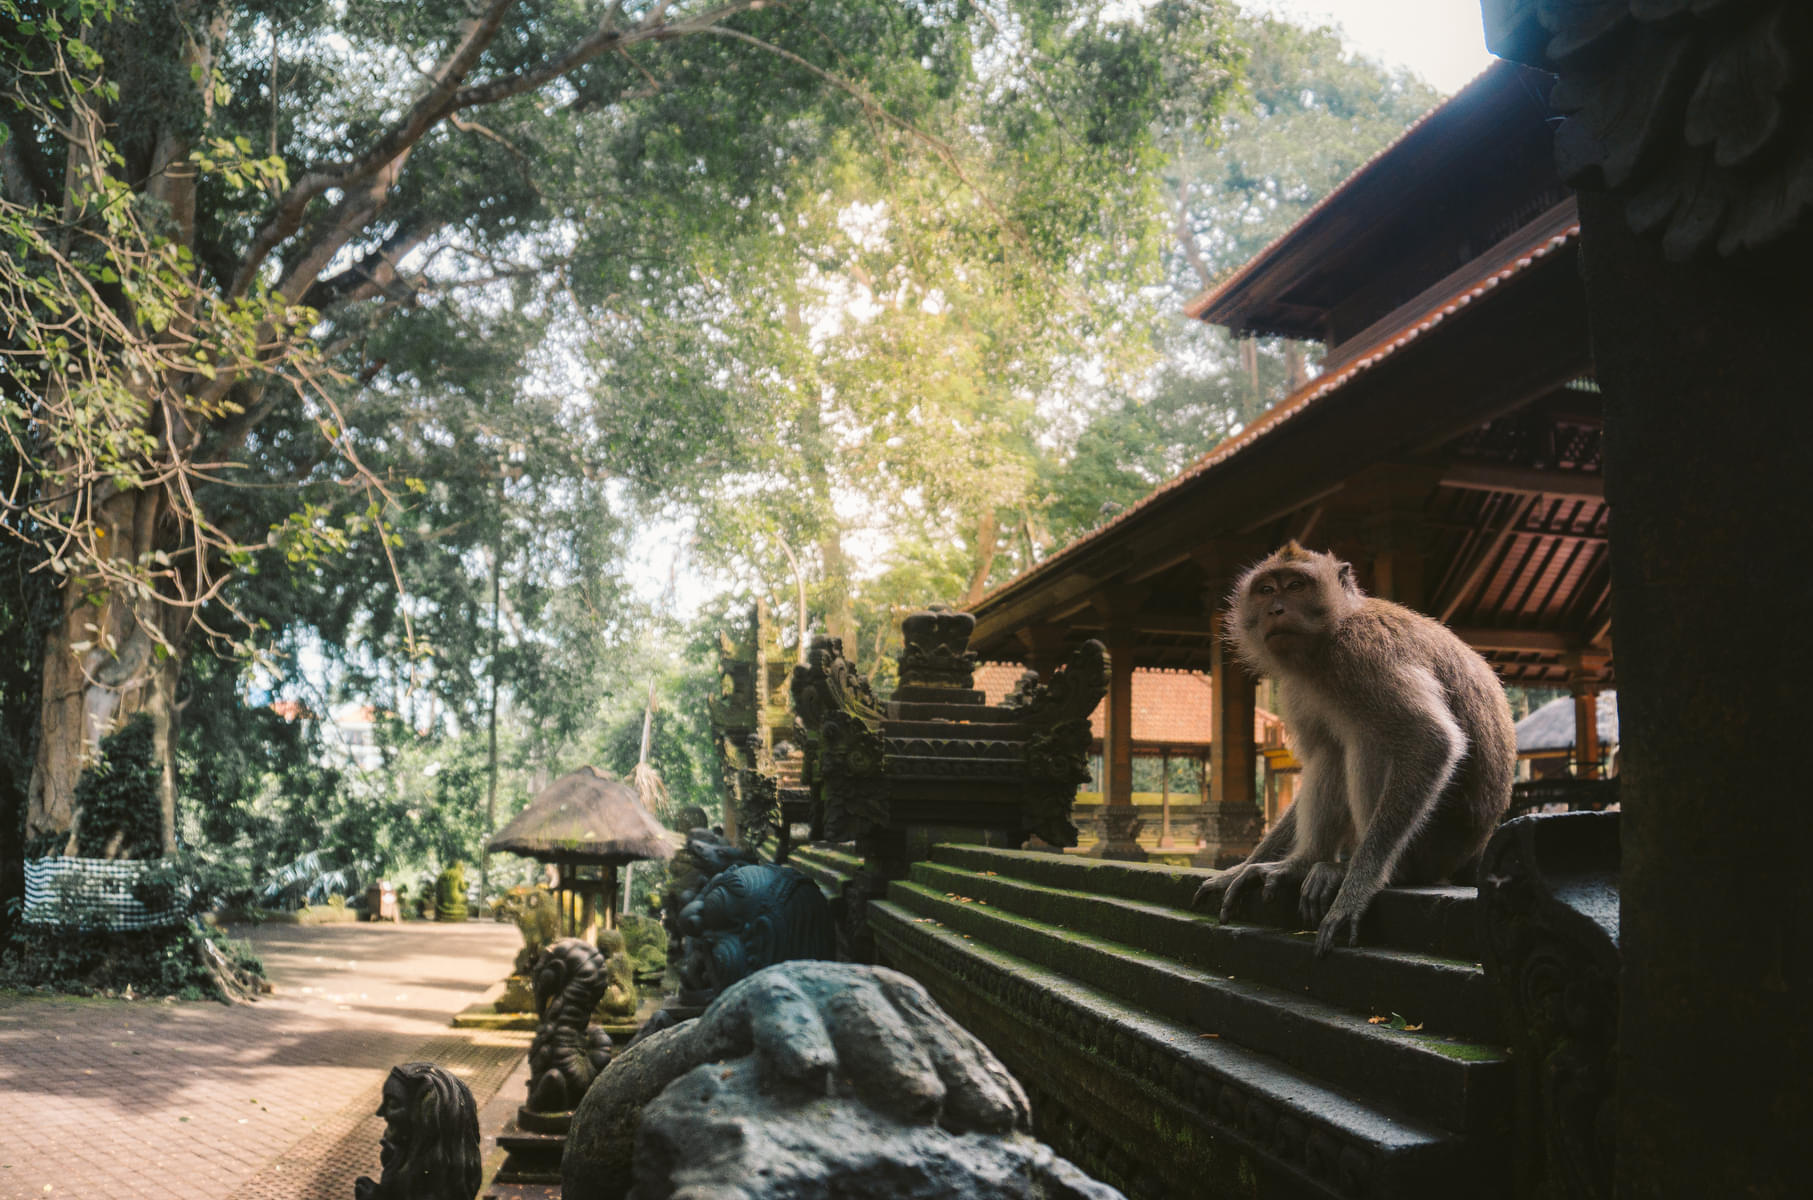 Welcome to the Monkey Forest in Ubud